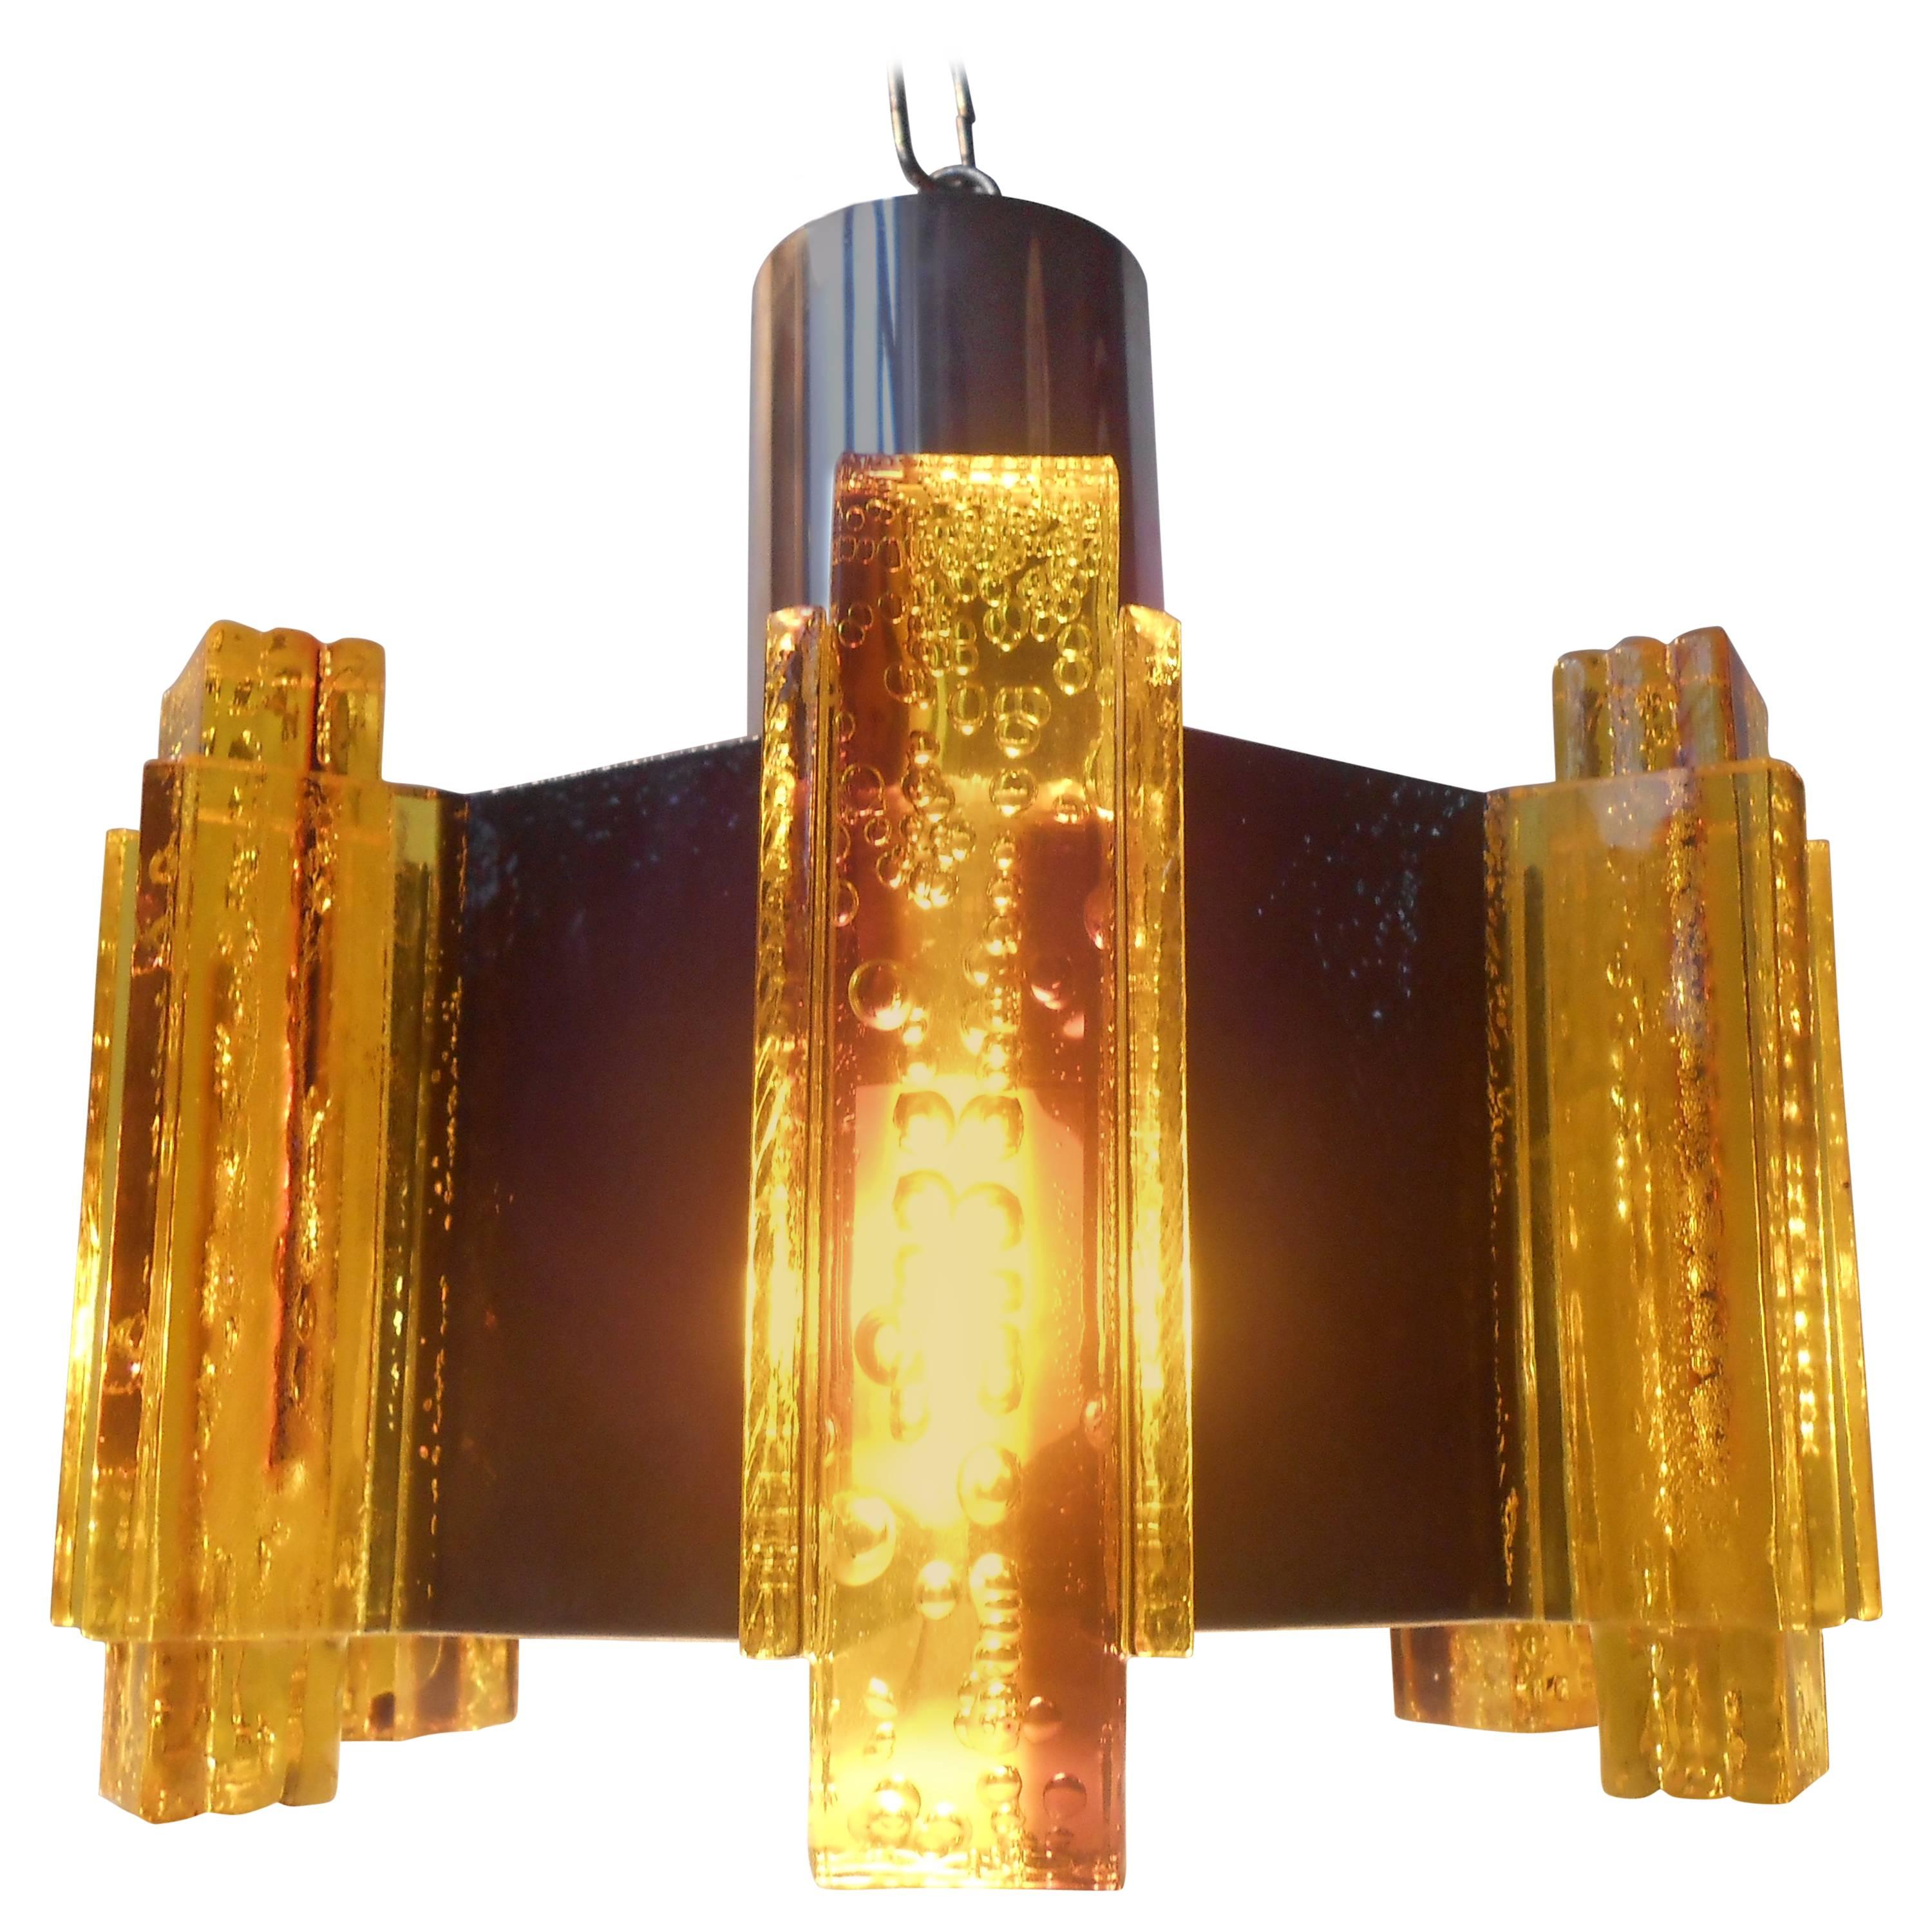 Vintage Claus Bolby Pendant with Brass Details, Danish Modern - a Spacey Twist